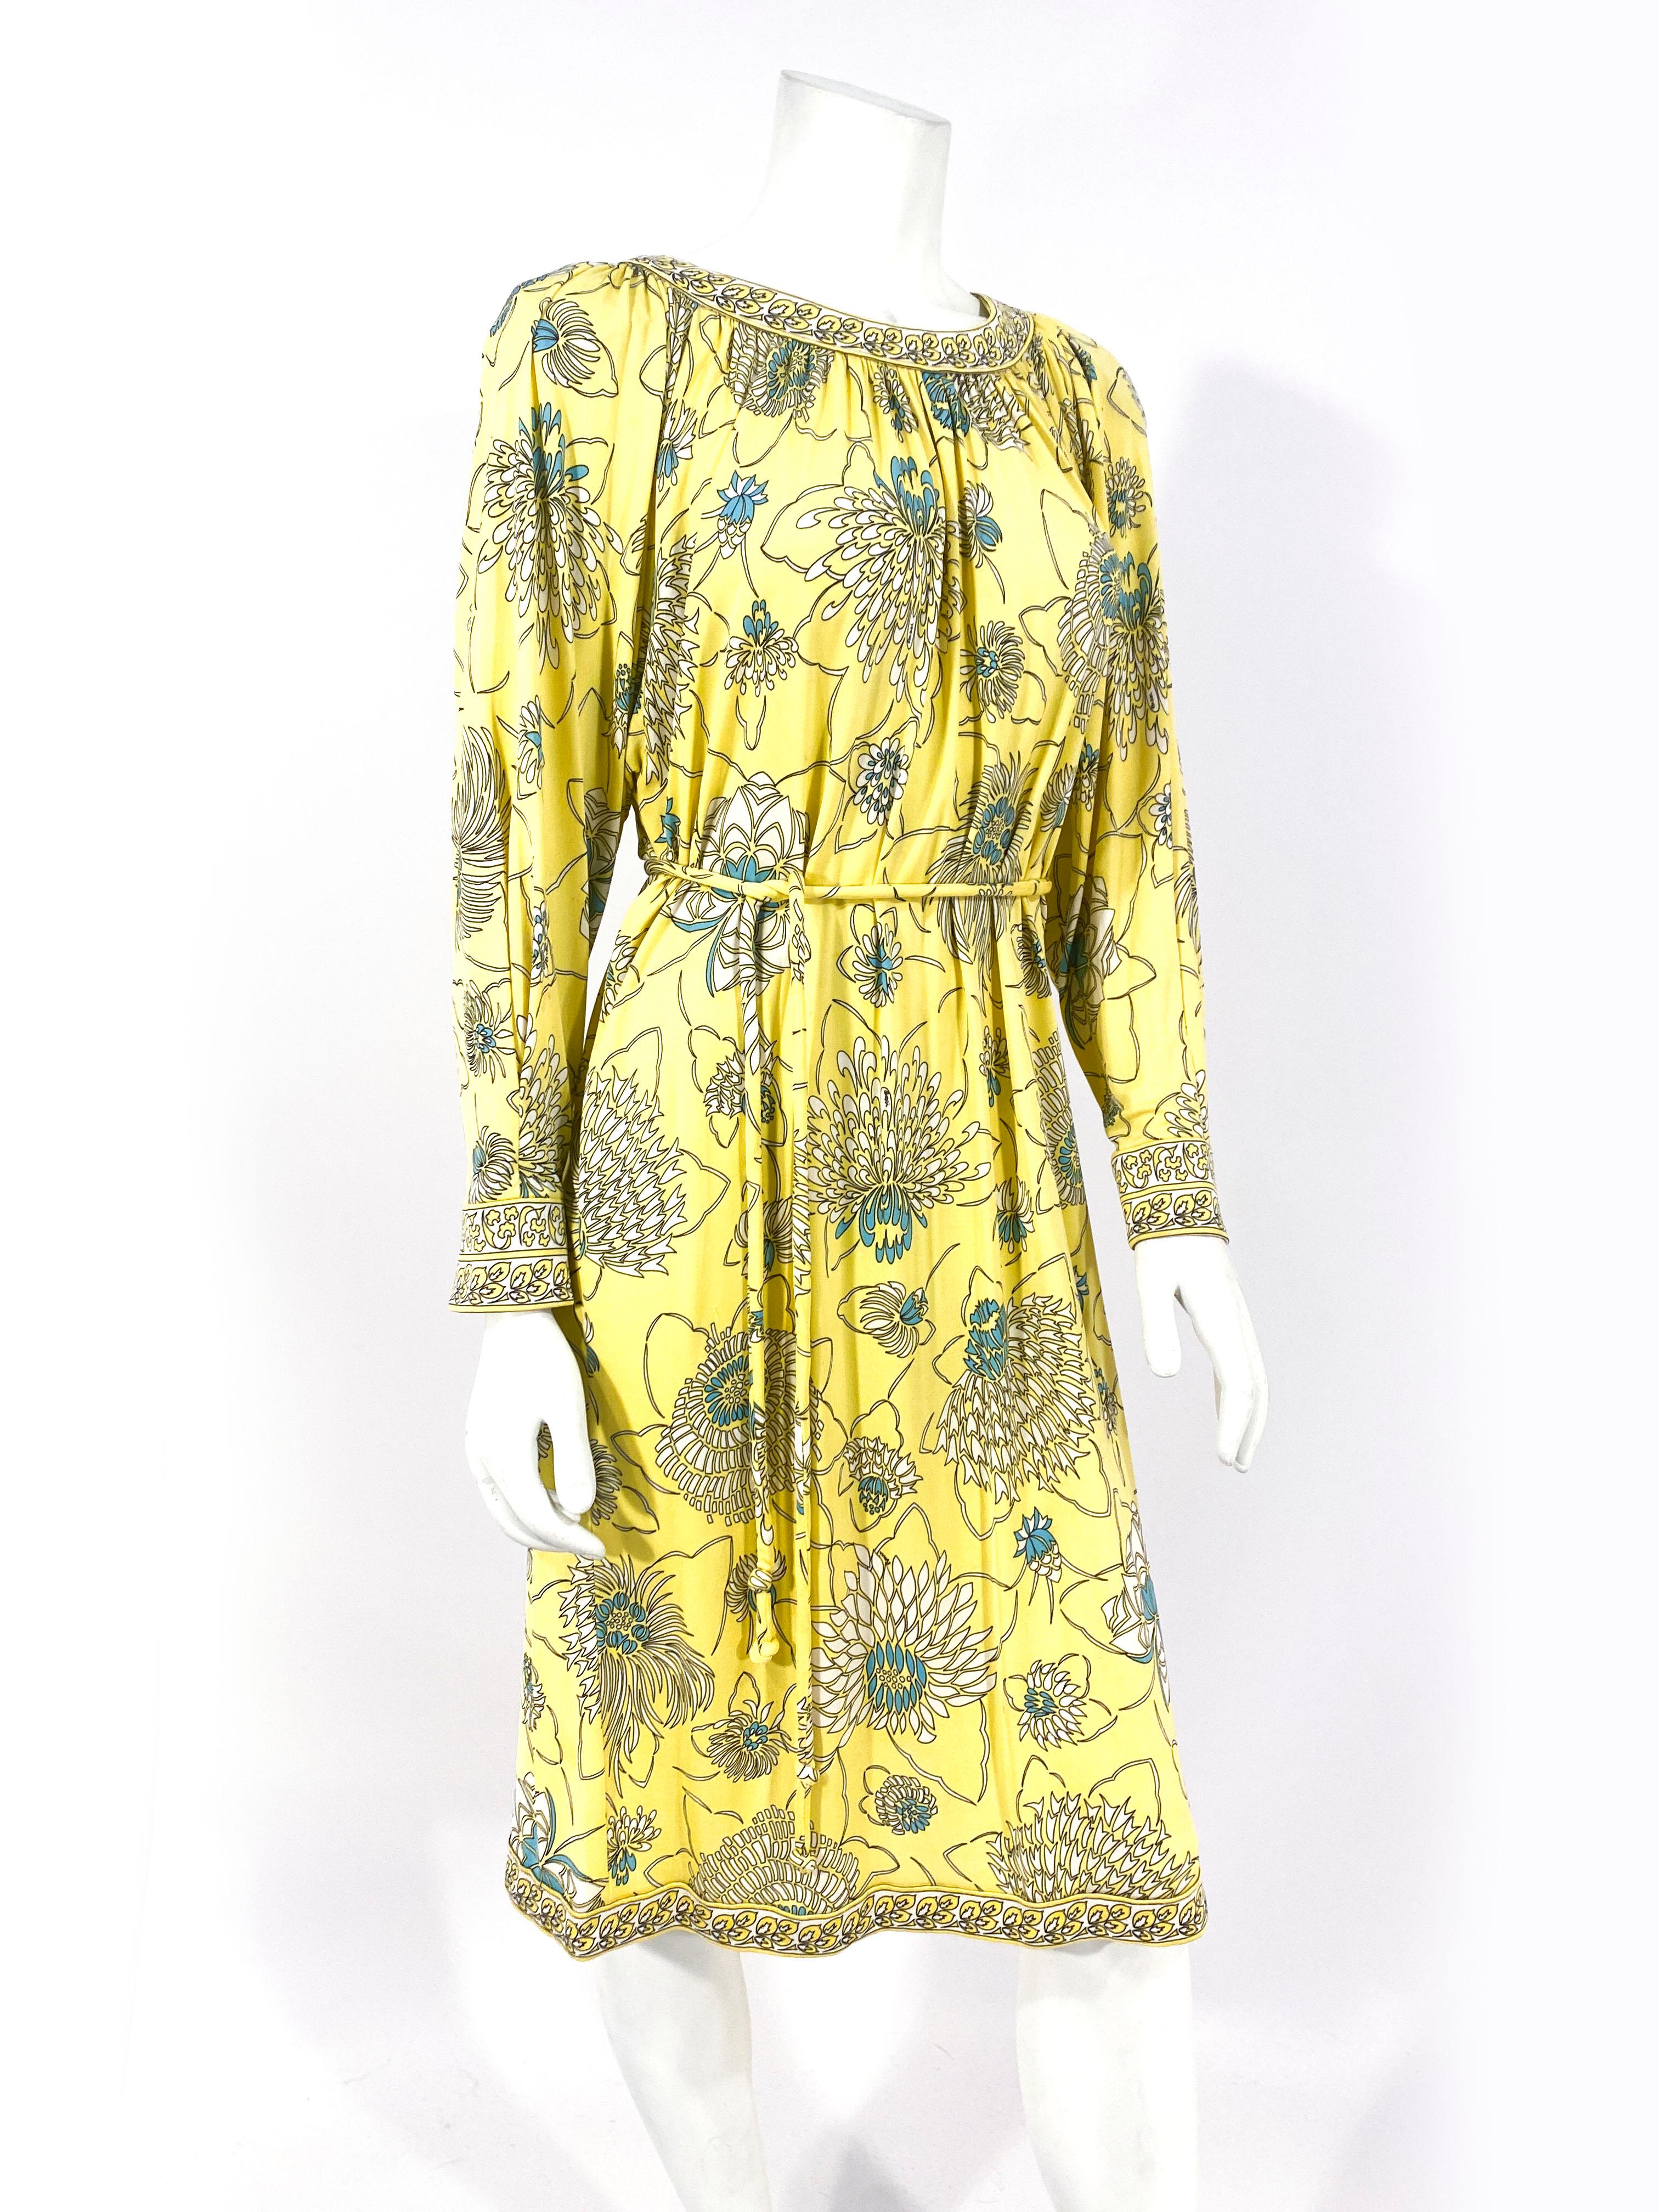 Women's 1970s Bessi Yellow Printed Silk Jersey Dress For Sale